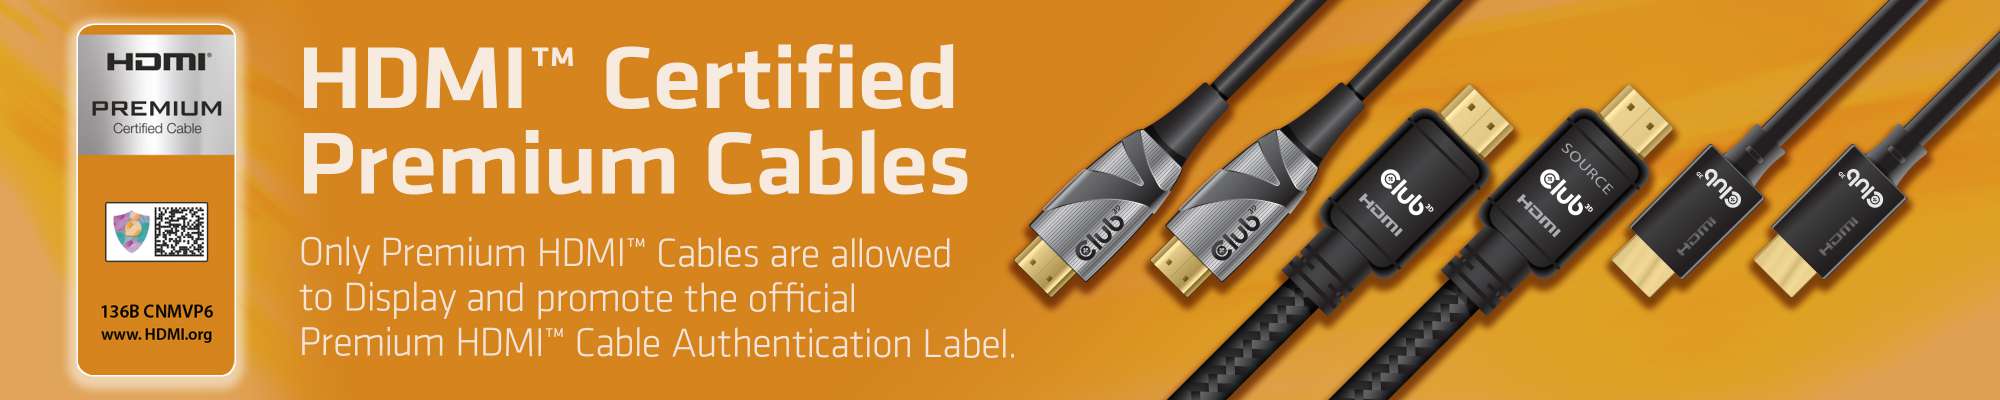 Premium High Speed HDMI 4K60Hz UHD Cable M/M 1 m / 3.28 ft 30AWG